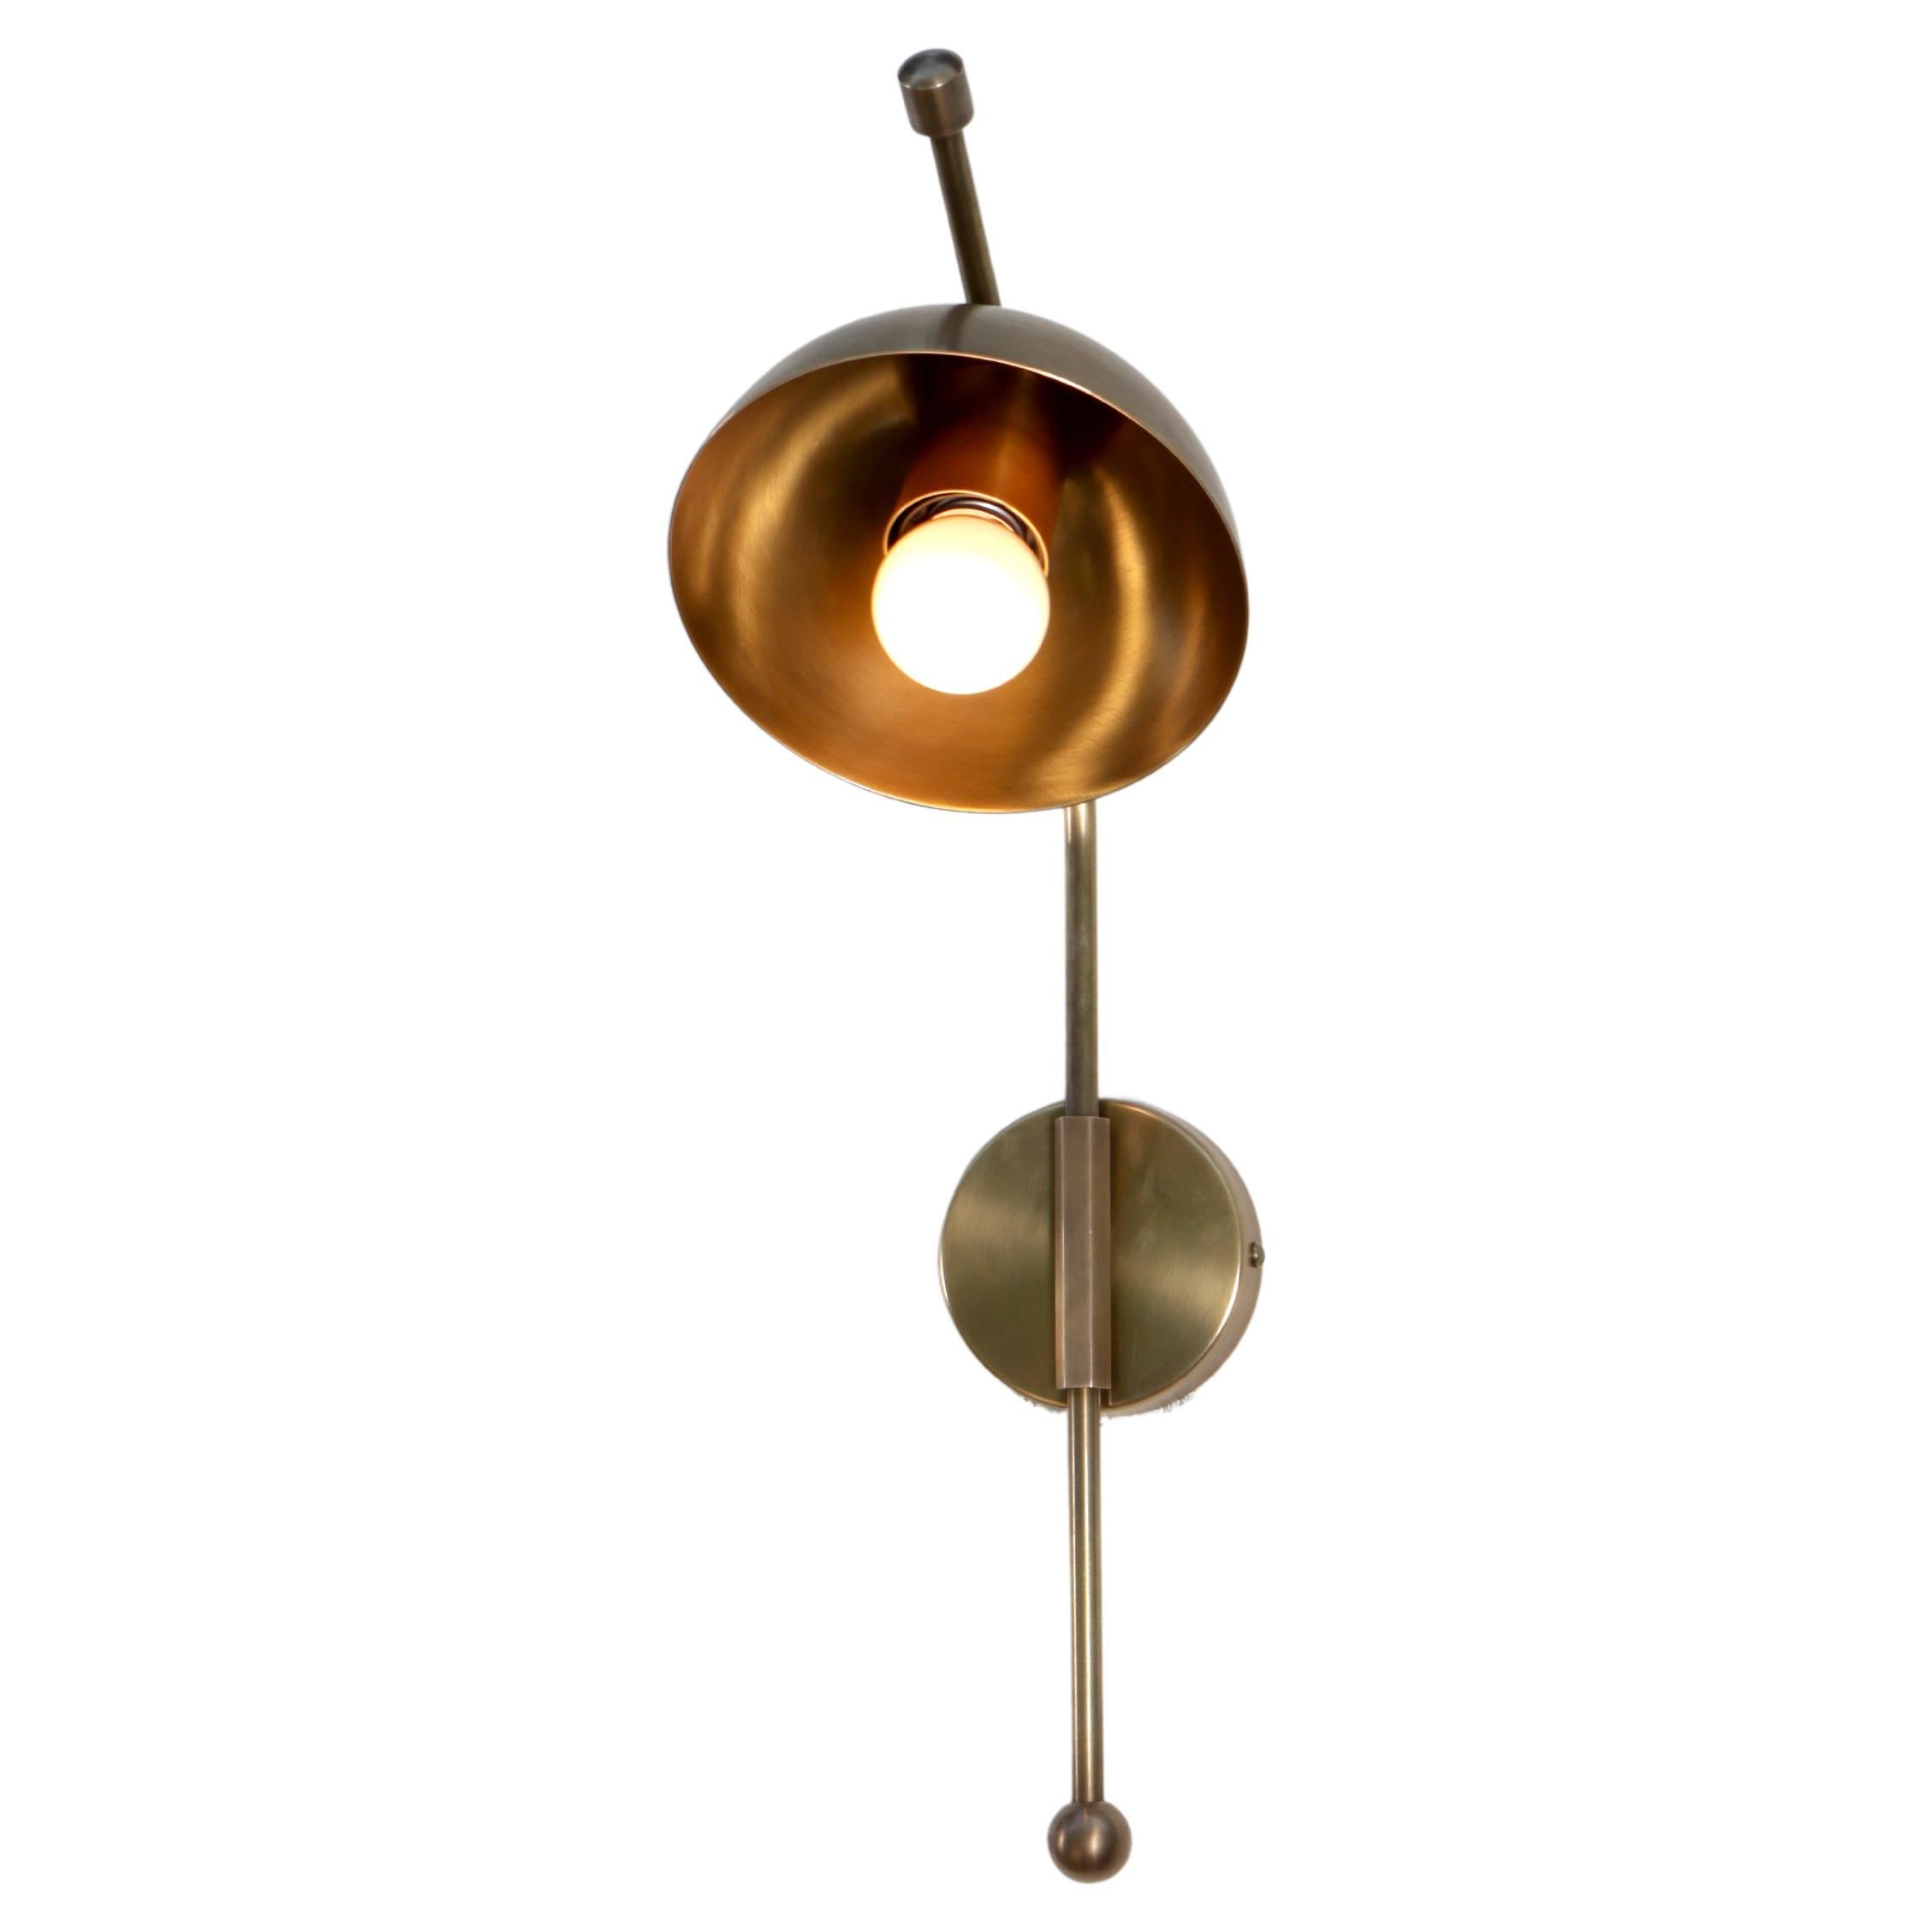 Wing Two Brass Dome Wall Sconce by Lamp Shaper